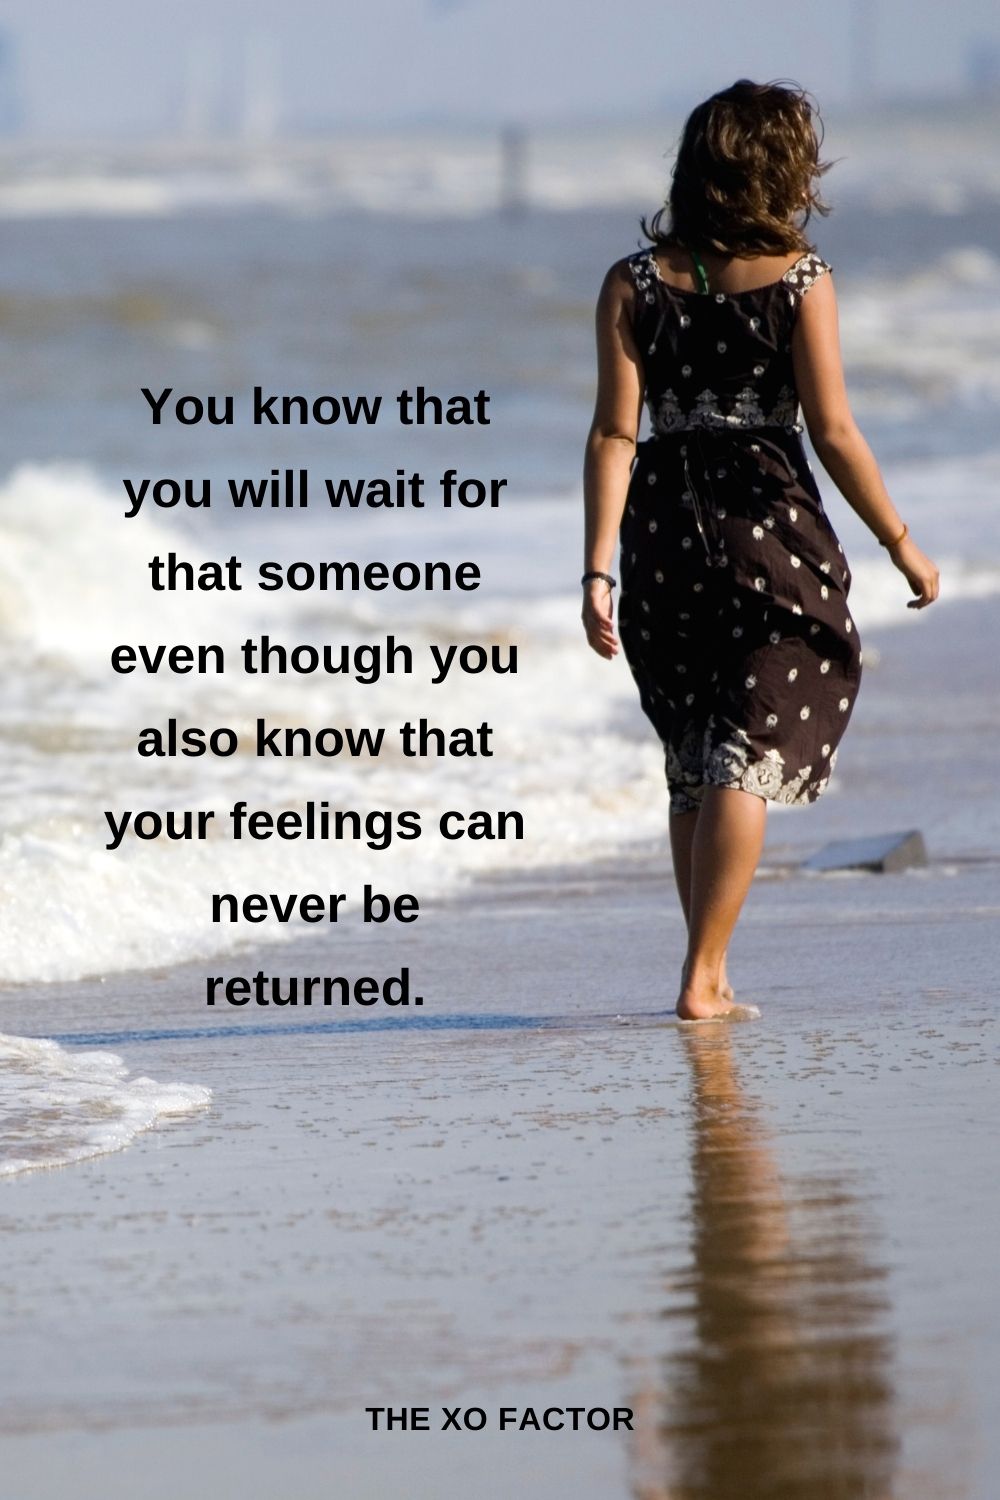 You know that you will wait for that someone even though you also know that your feelings can never be returned.